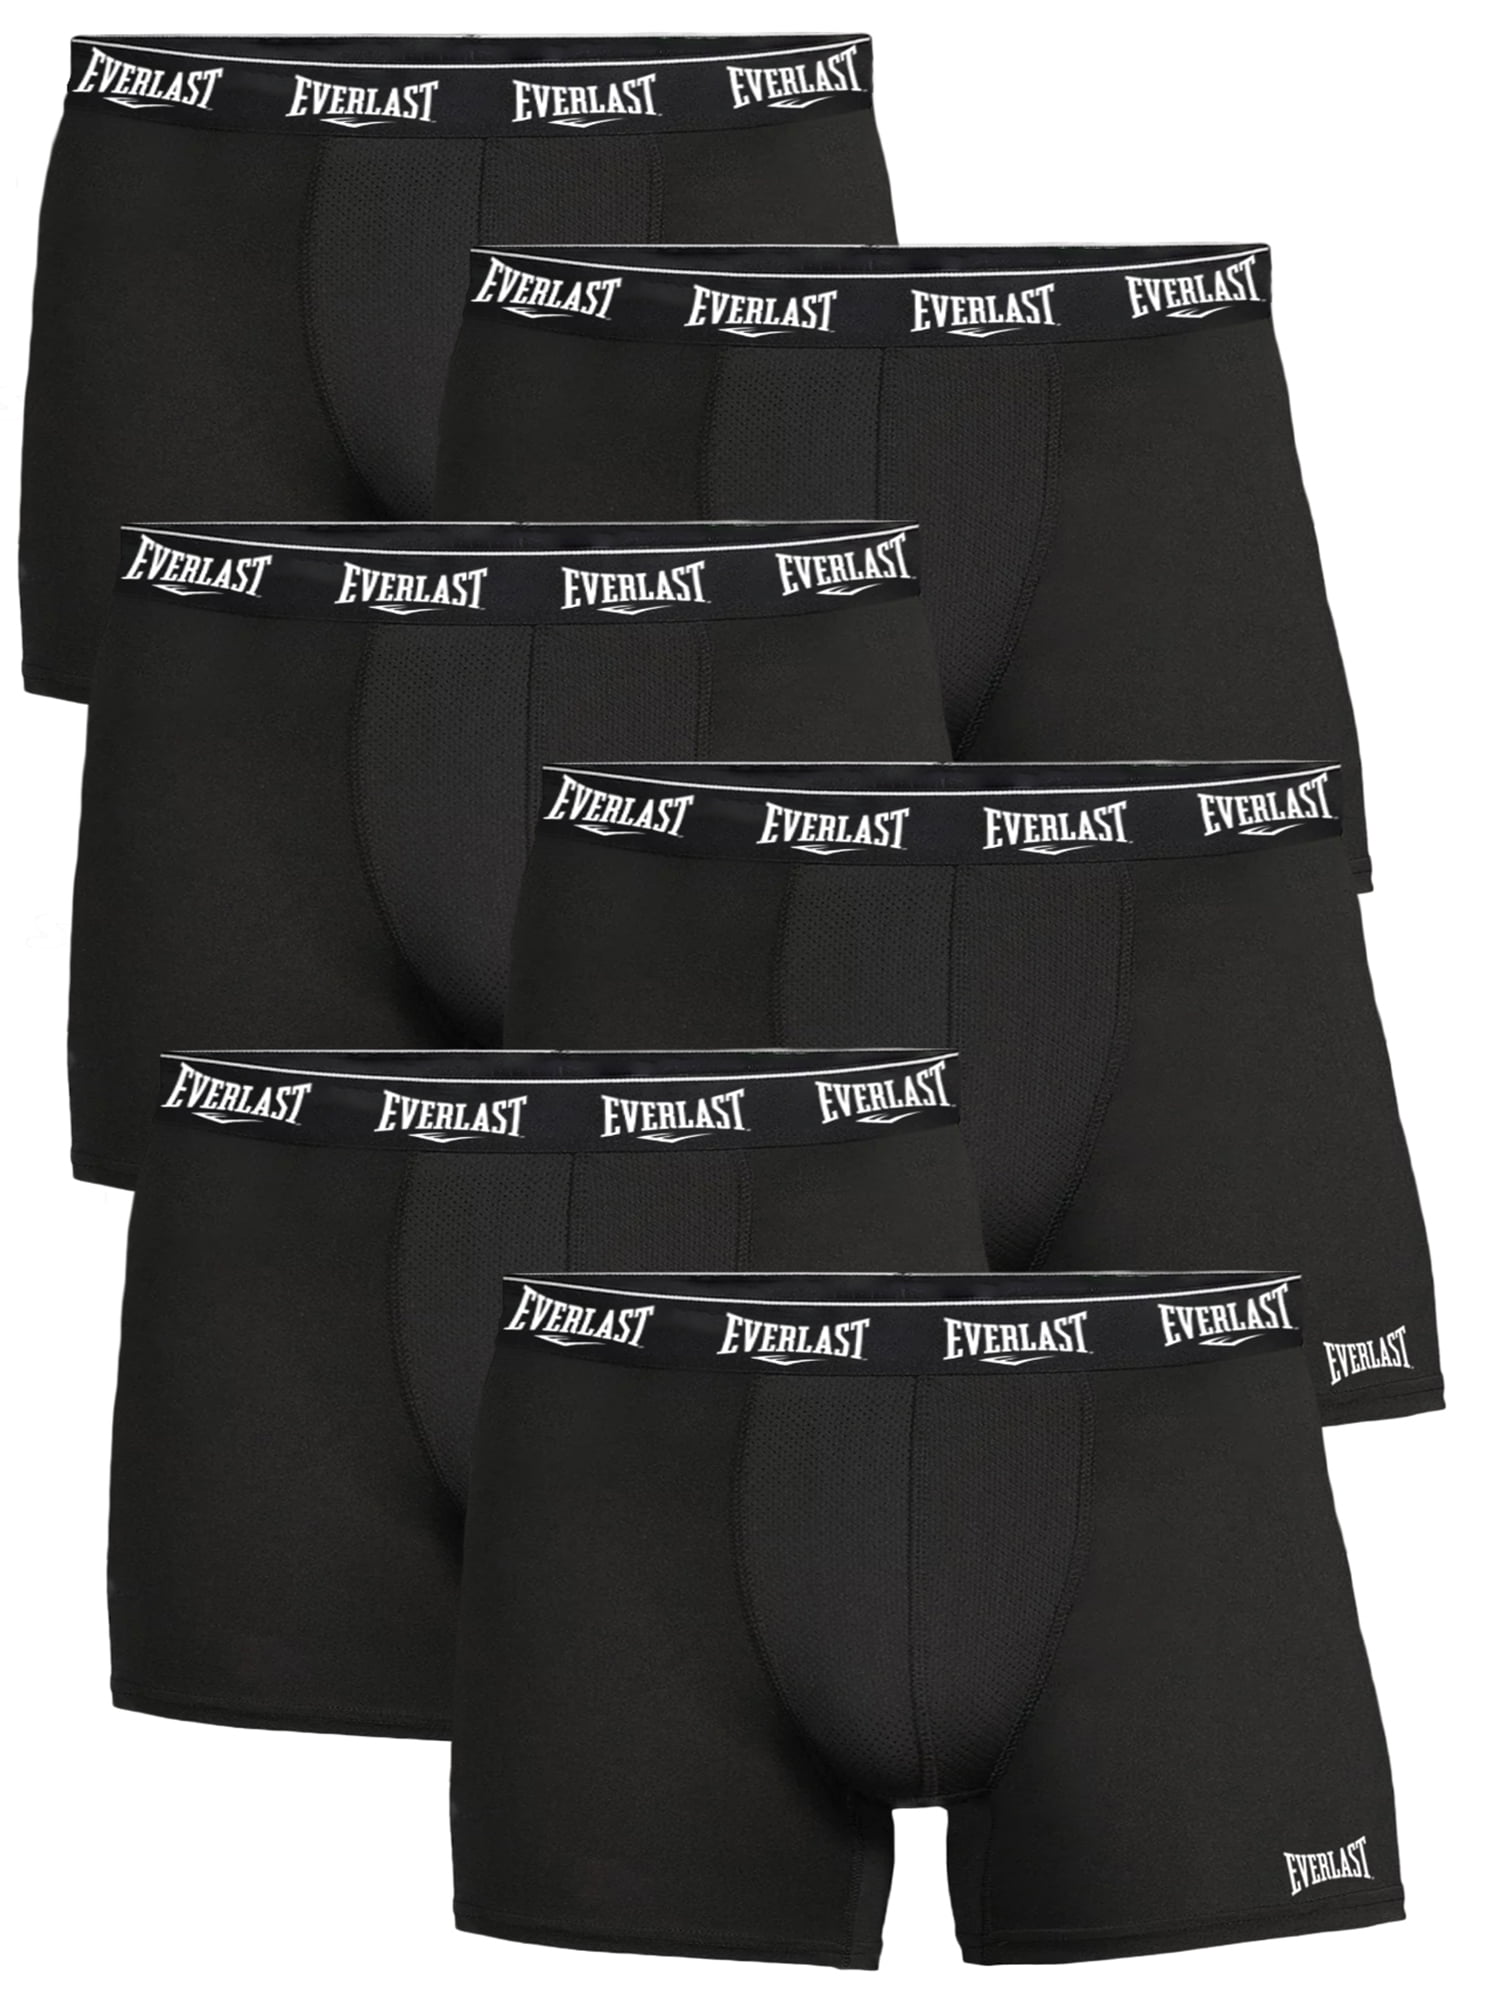 Black Y-front underpants made of organic cotton - Bread & Boxers